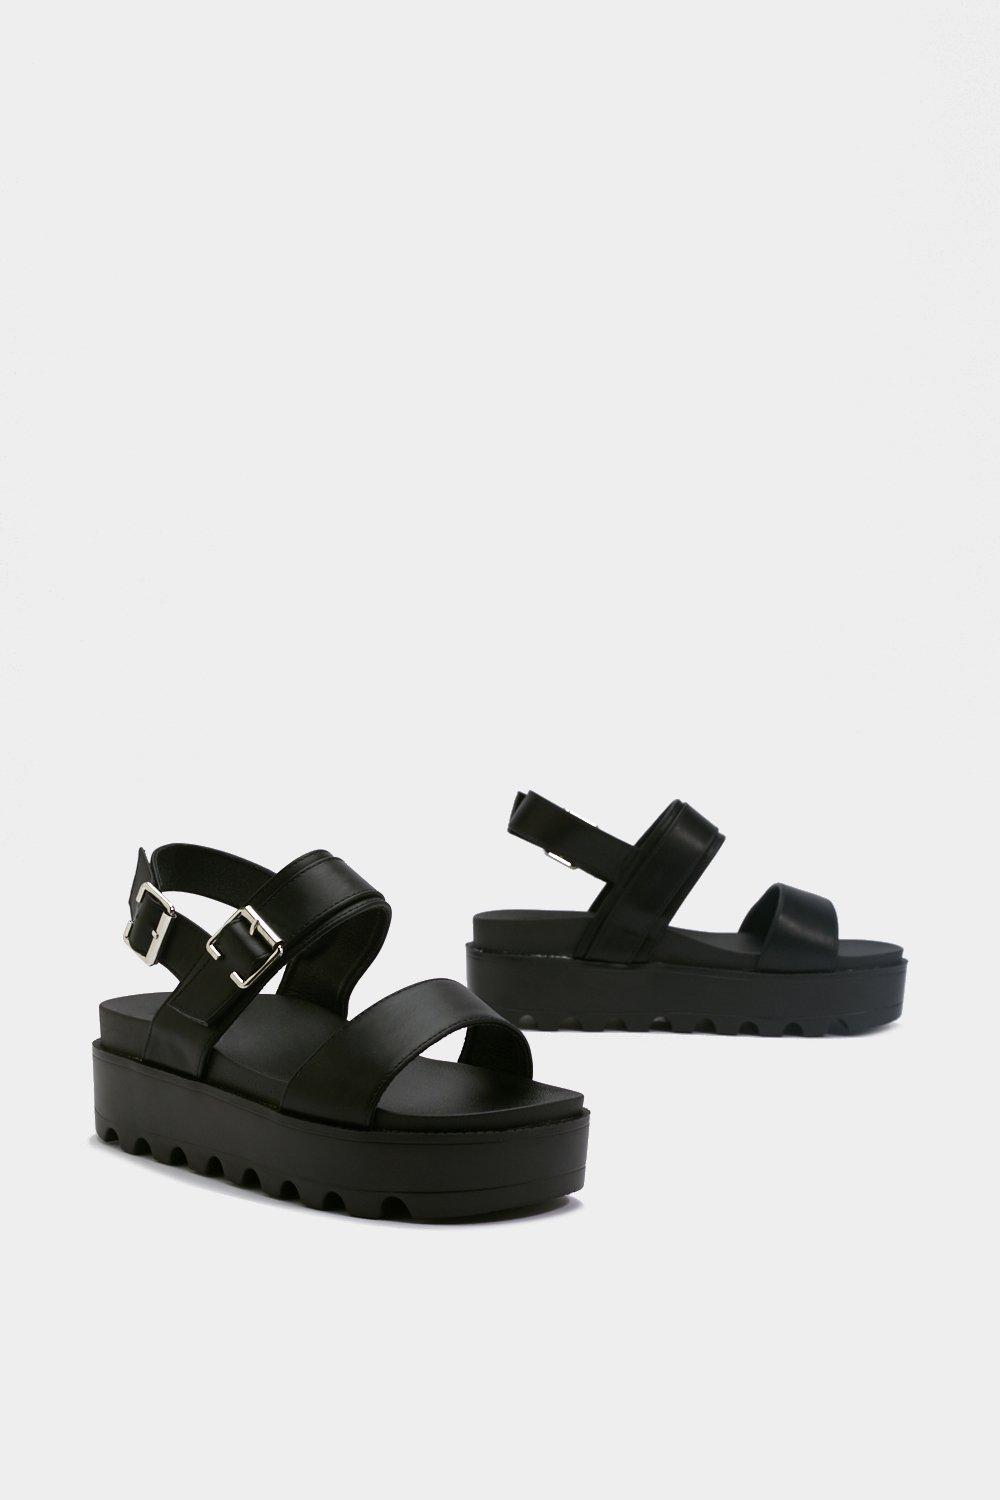 Nasty Gal Faux Leather Buckle Platform Sandals in Black | Lyst